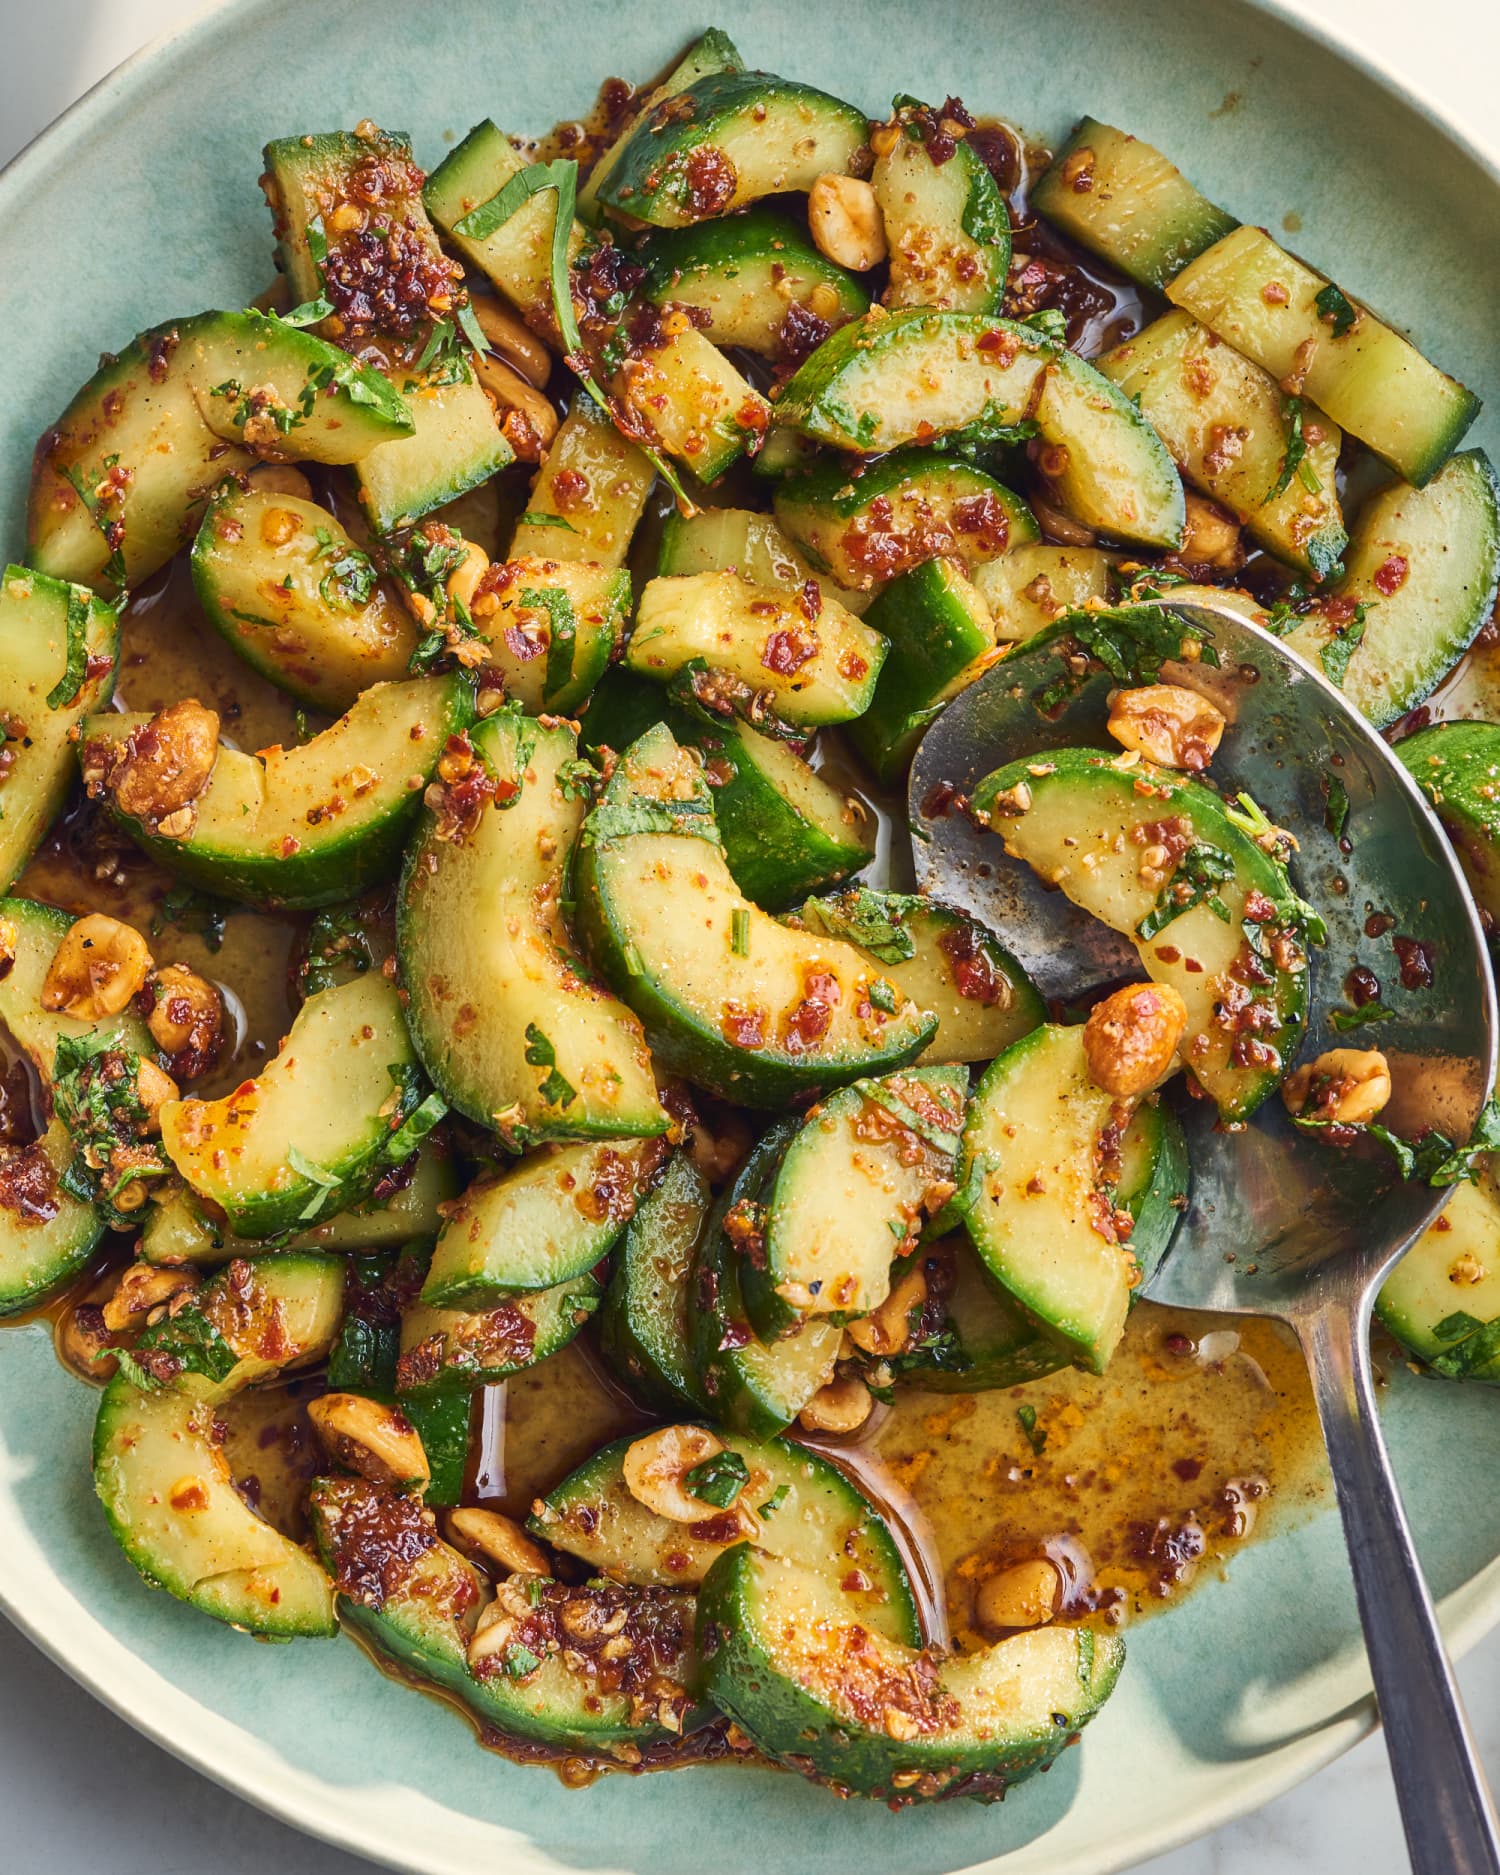 My Dad’s Sichuan Smashed Cucumber Salad Is a Spicy Summer Staple